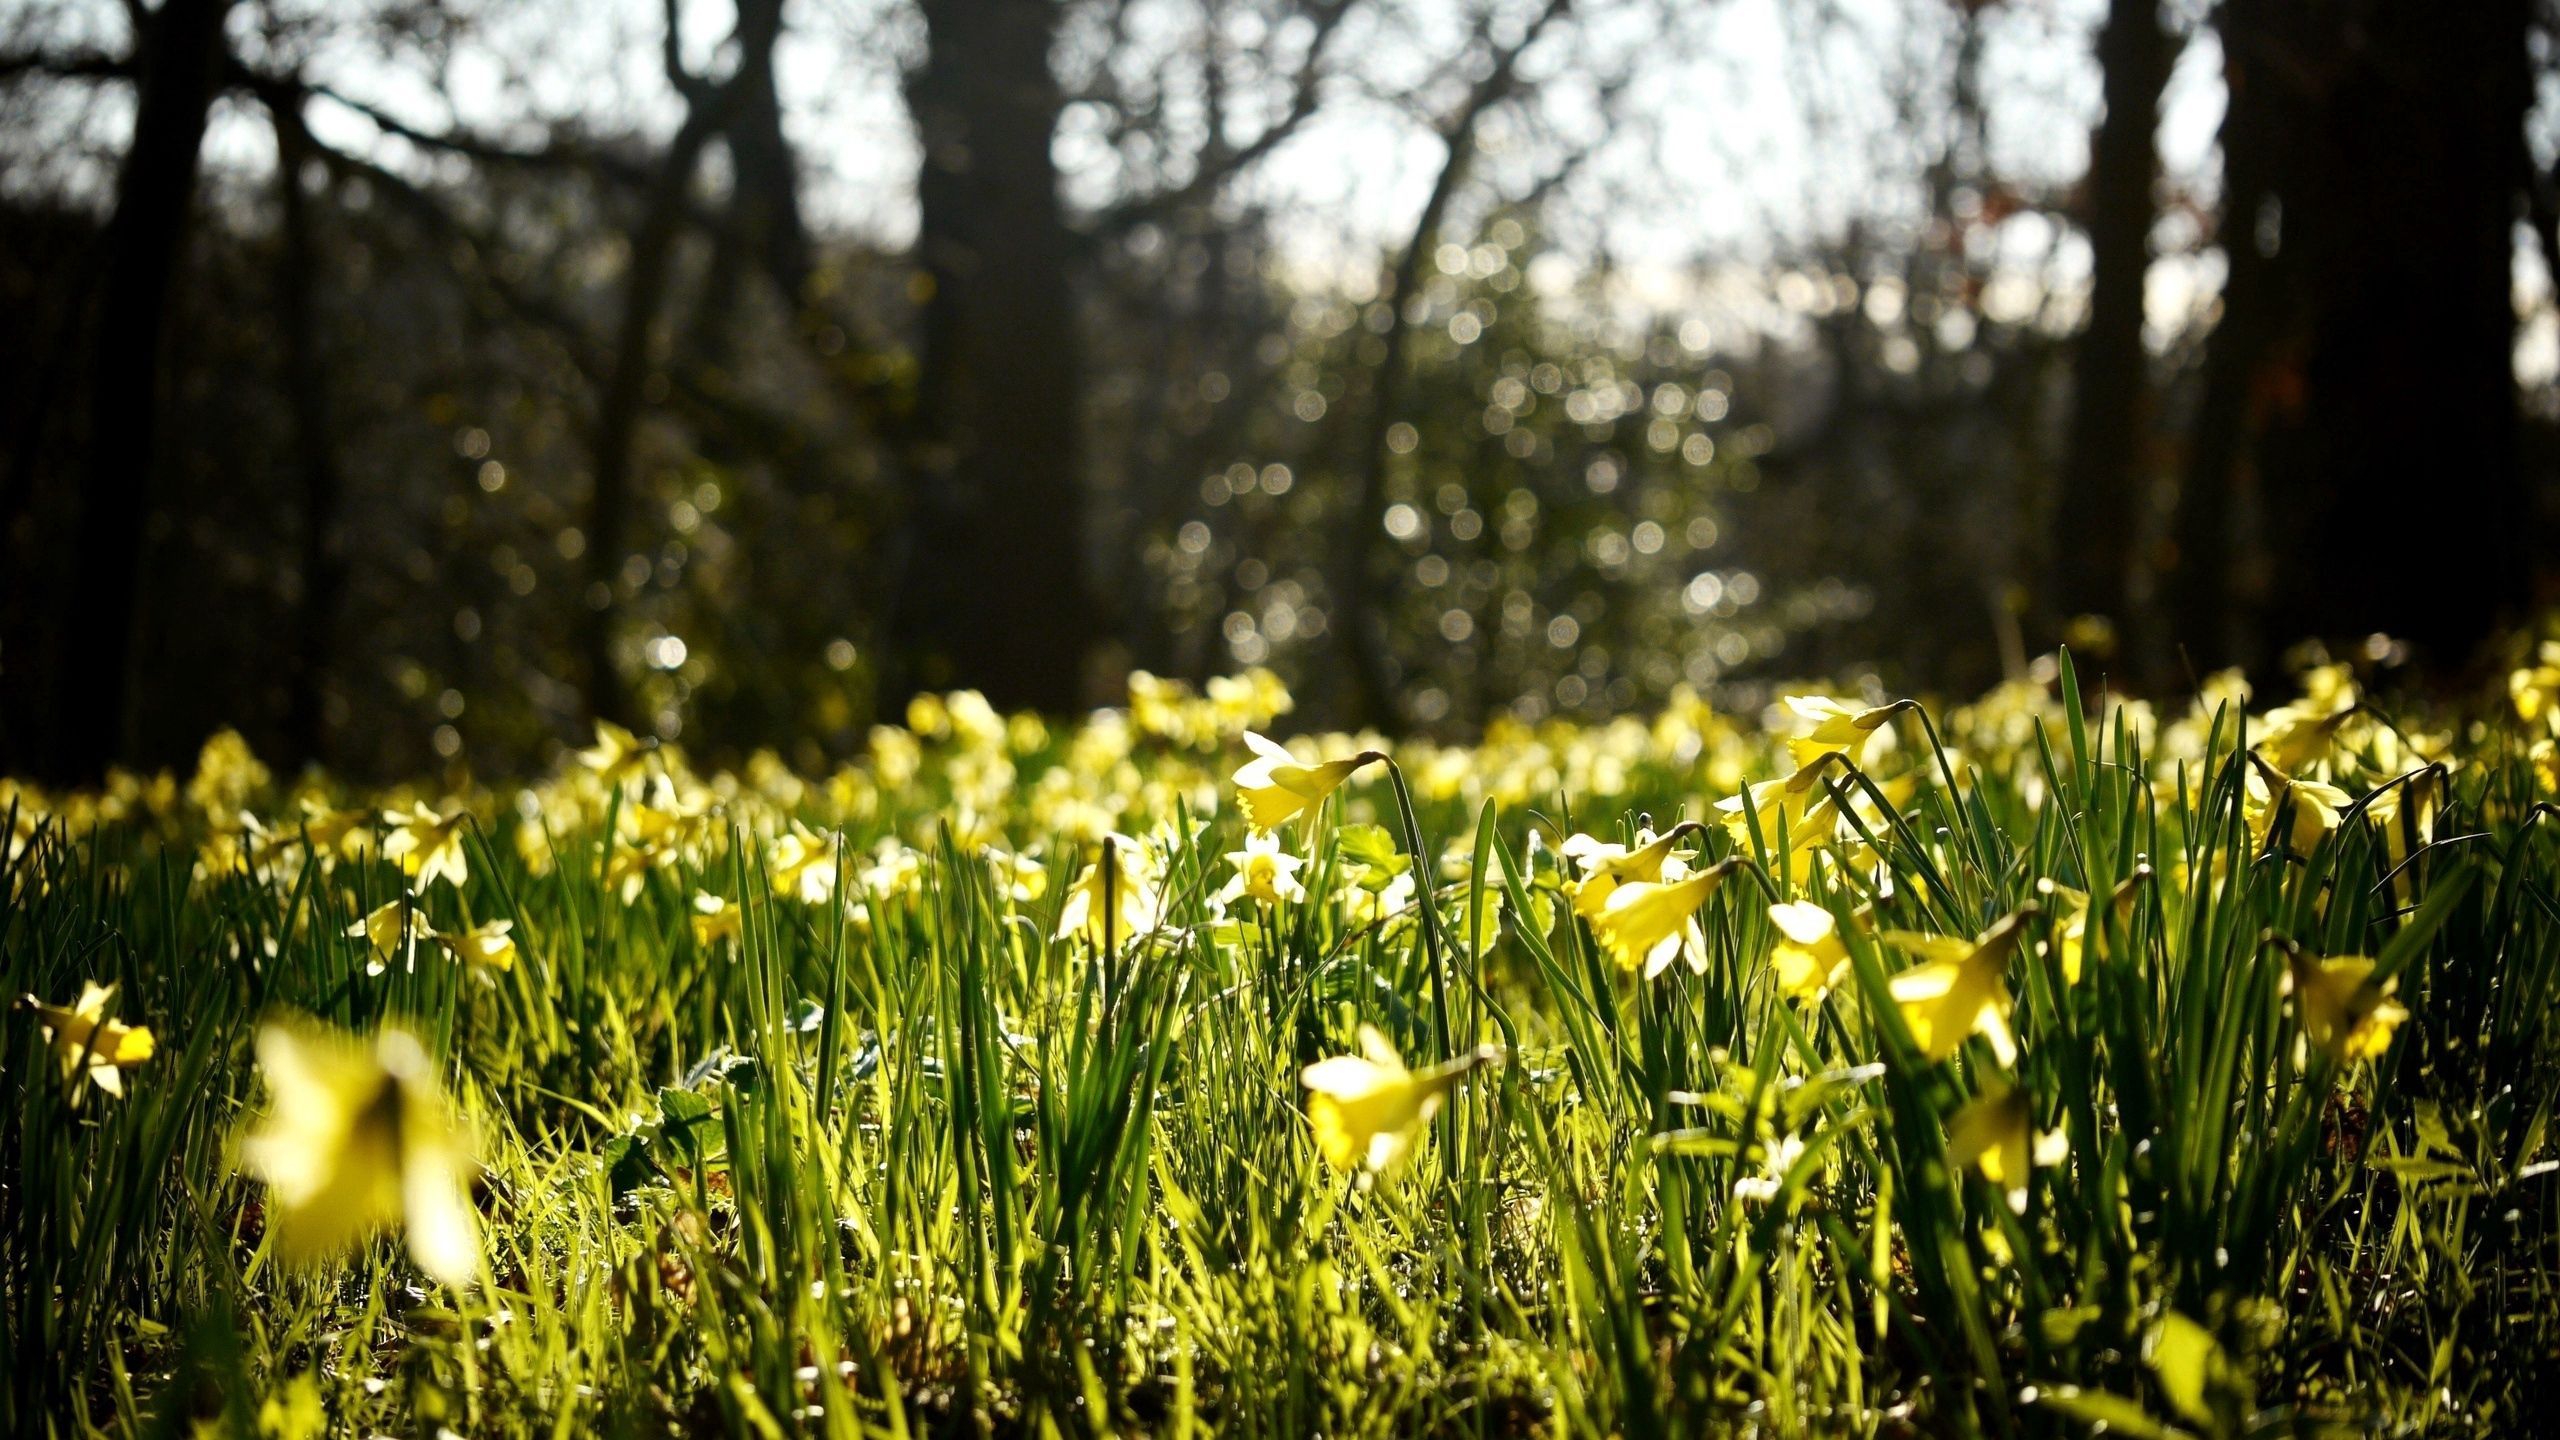 Download wallpaper 2560x1440 daffodils, spring, forest, nature, reflections widescreen 16:9 HD background